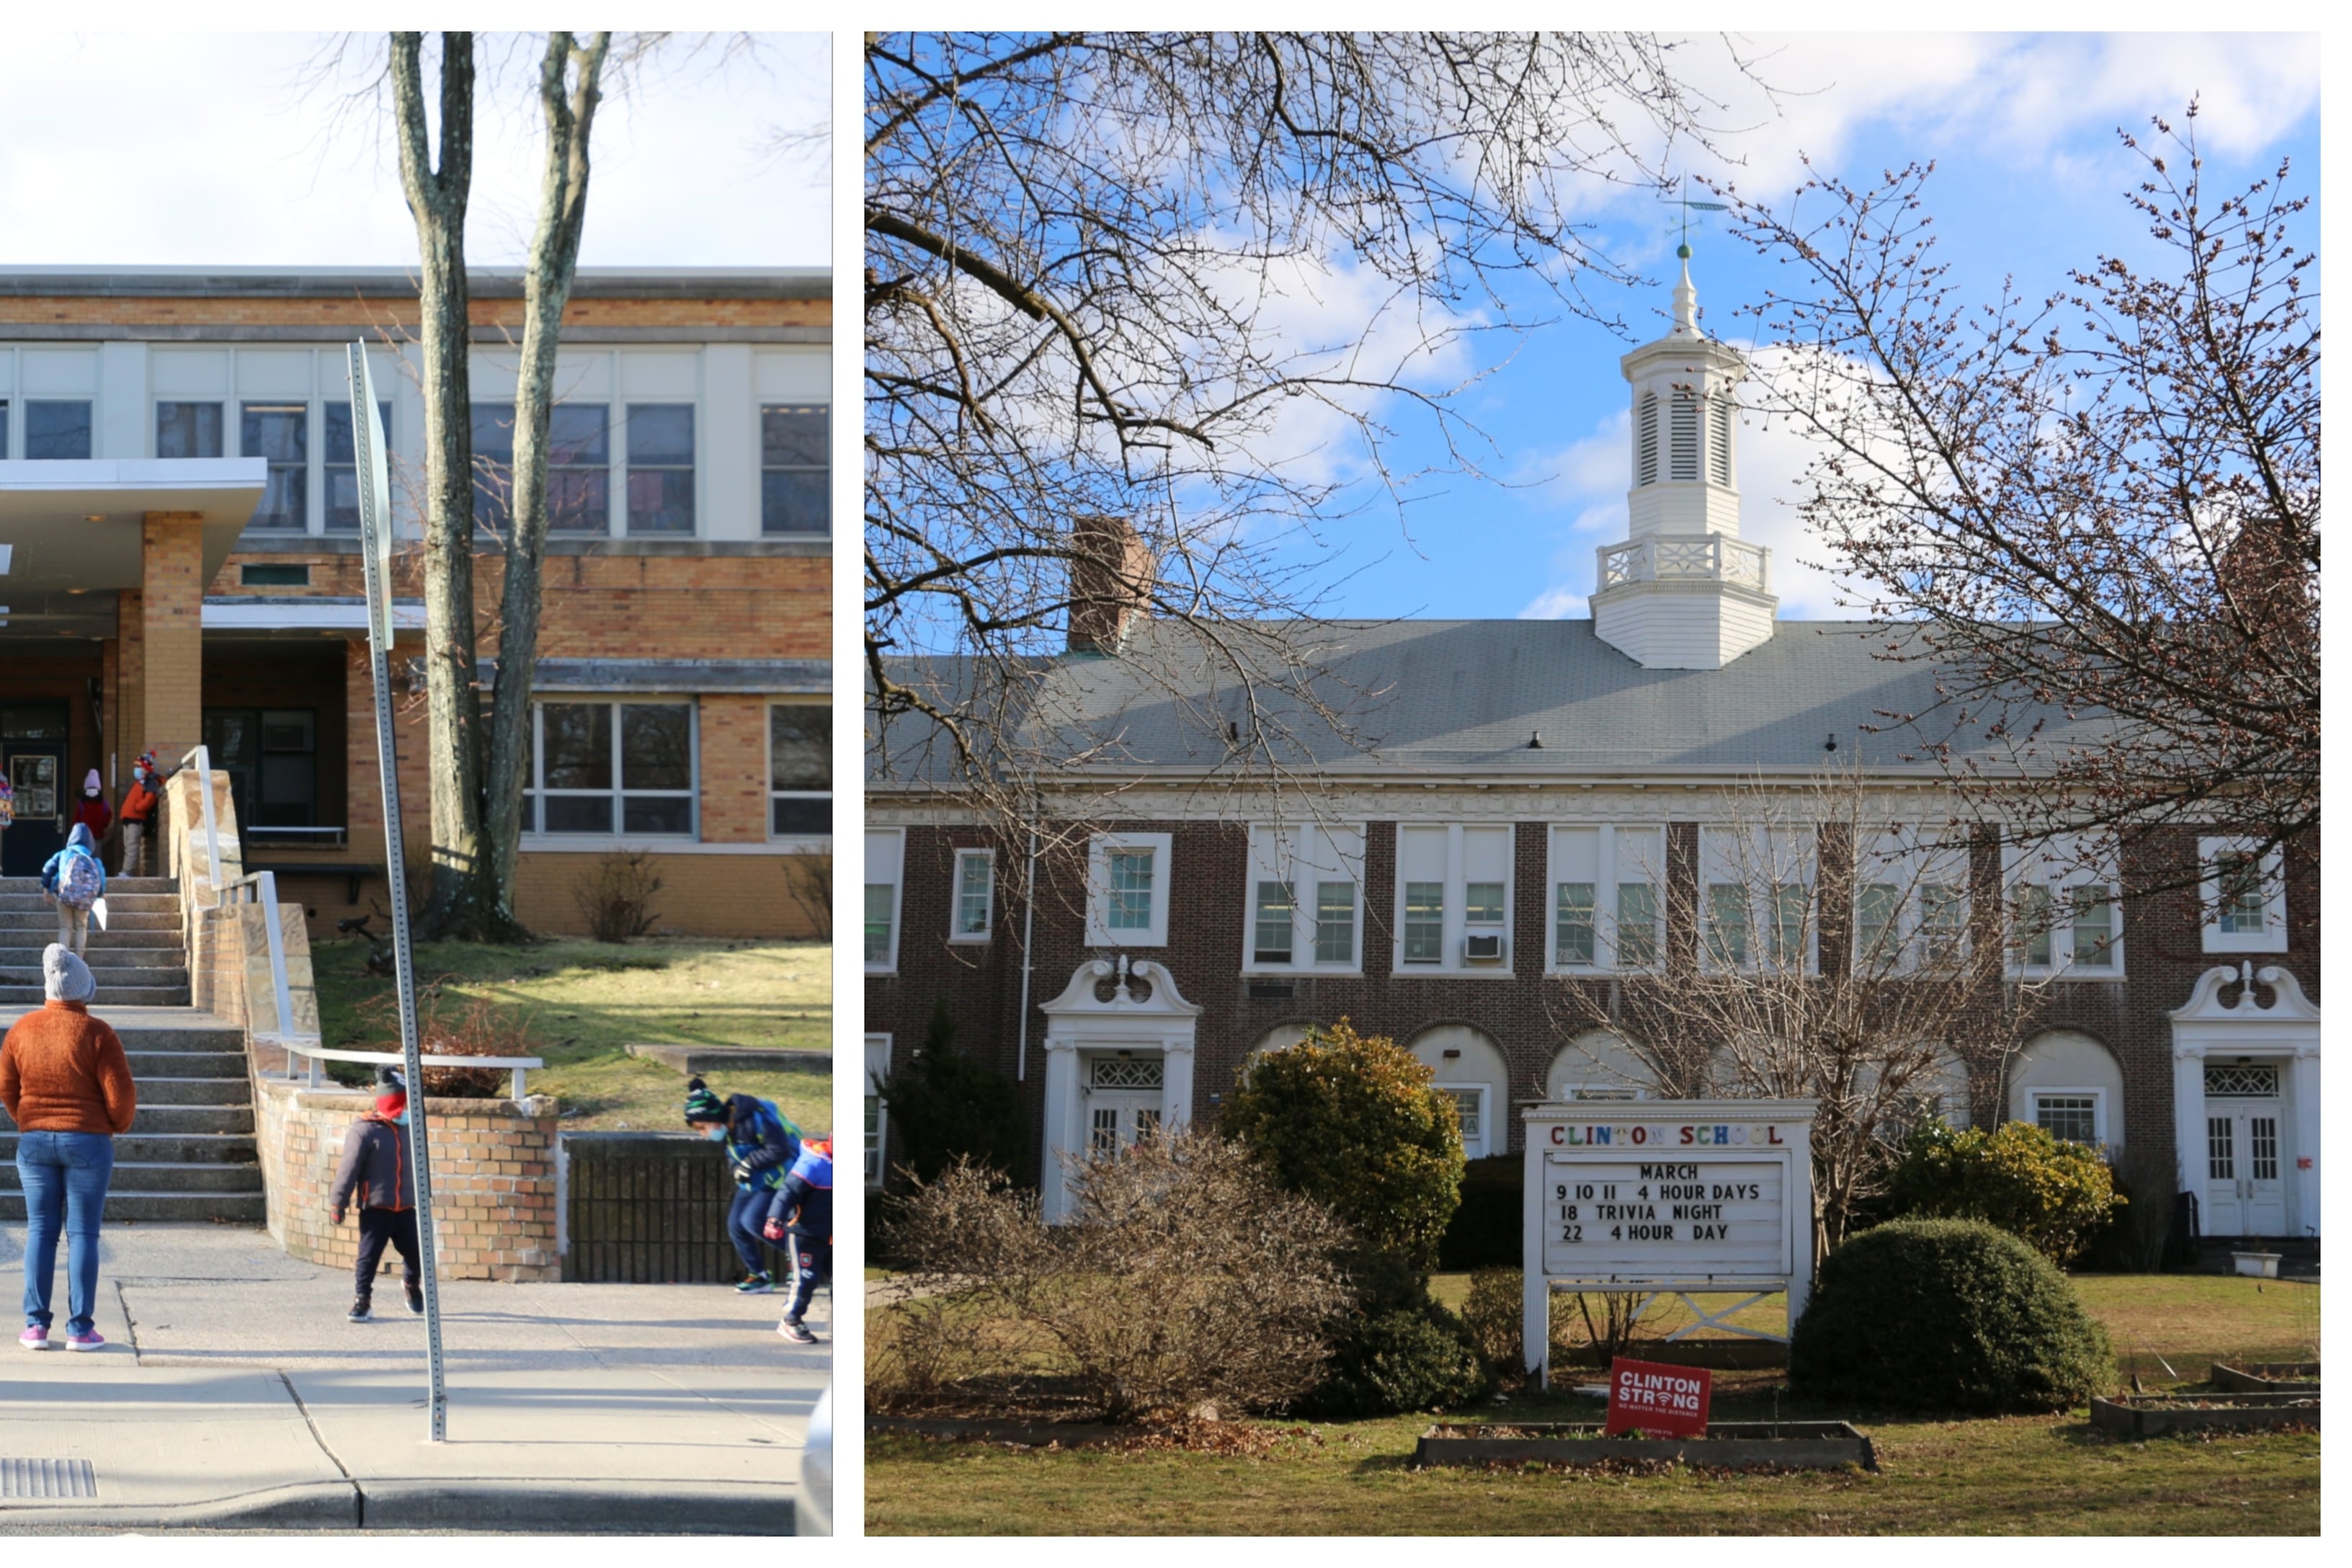 Side-by-side photos of Mount Vernon School in Newark and Clinton Elementary School in Maplewood